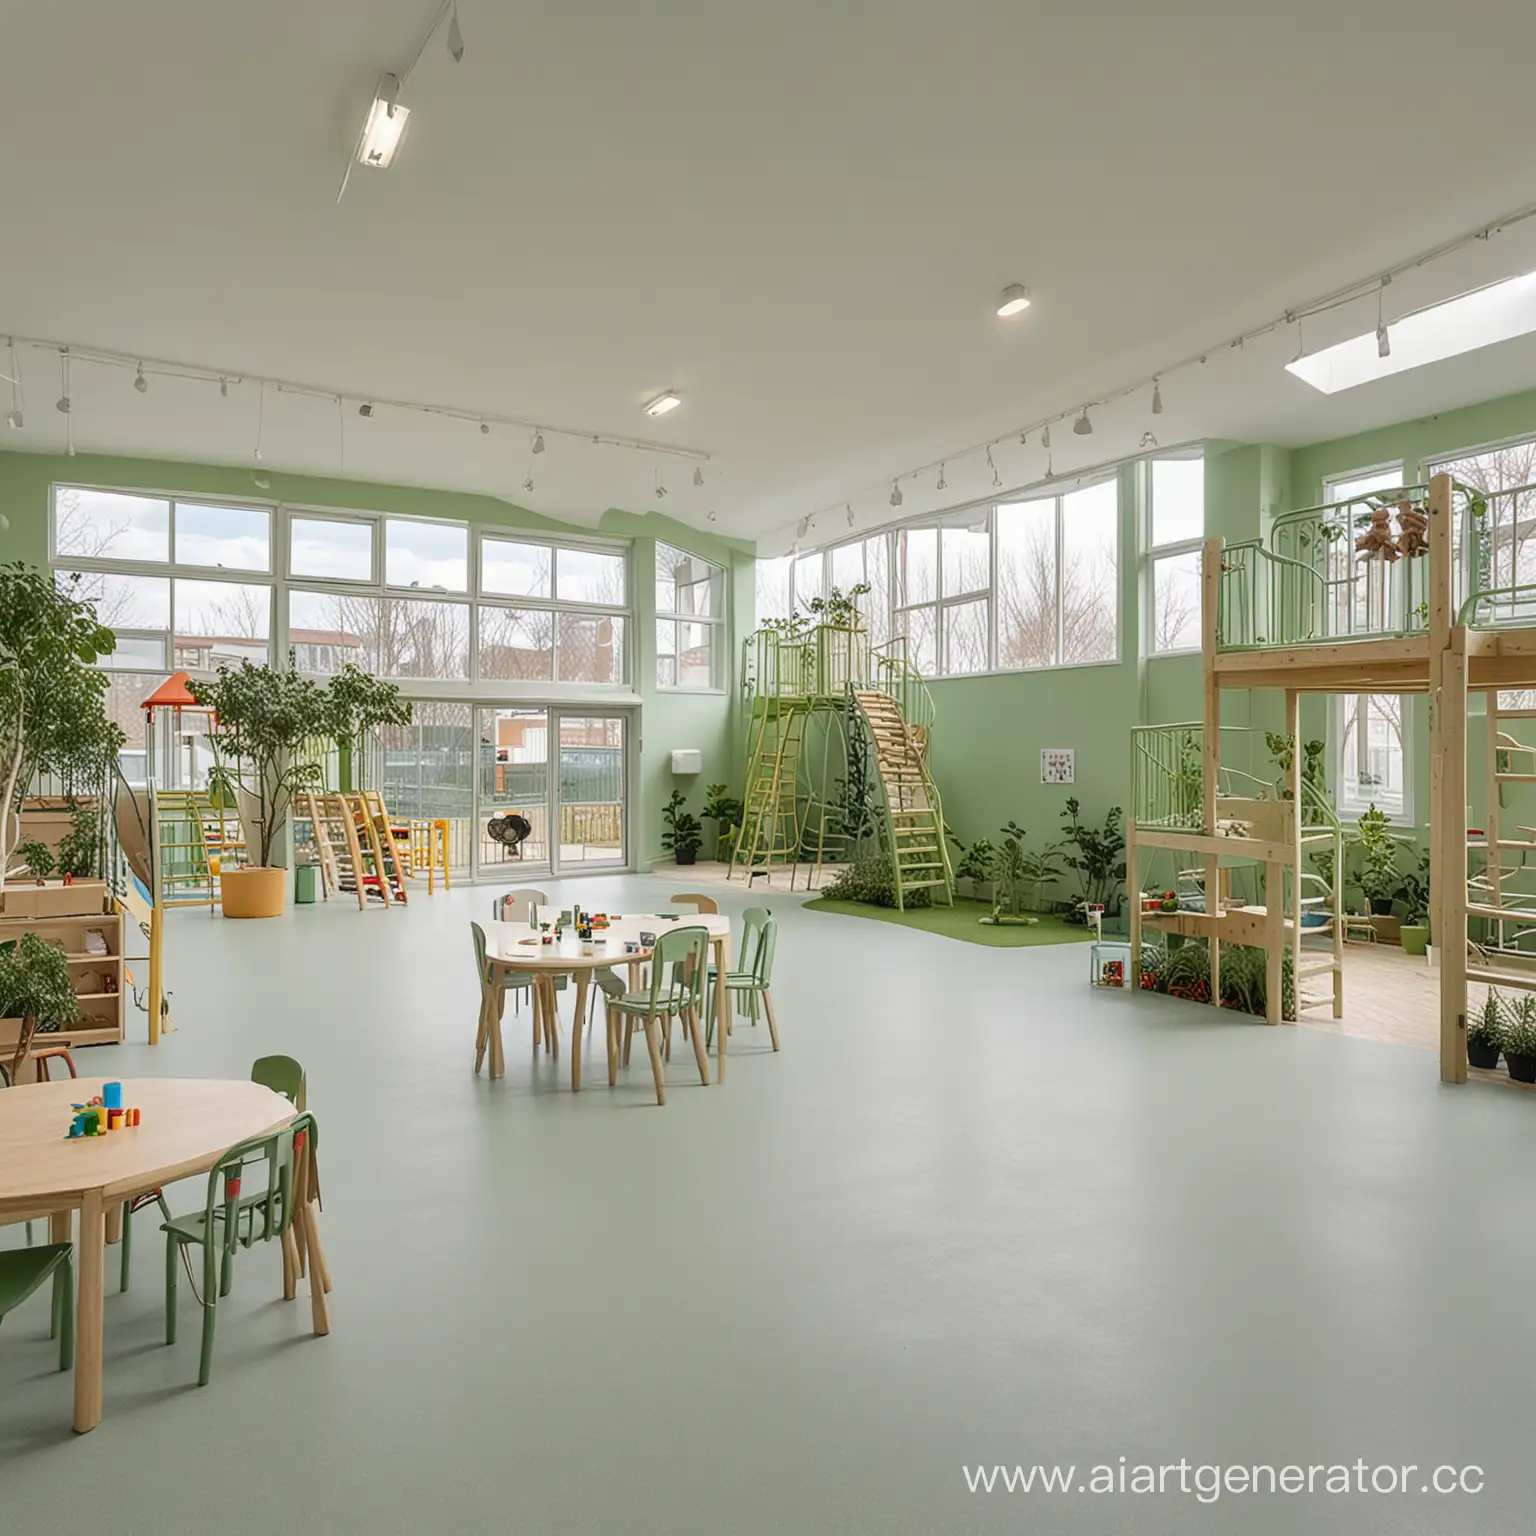 GreenThemed-Preschool-with-Modern-Playgrounds-and-Lush-Flora